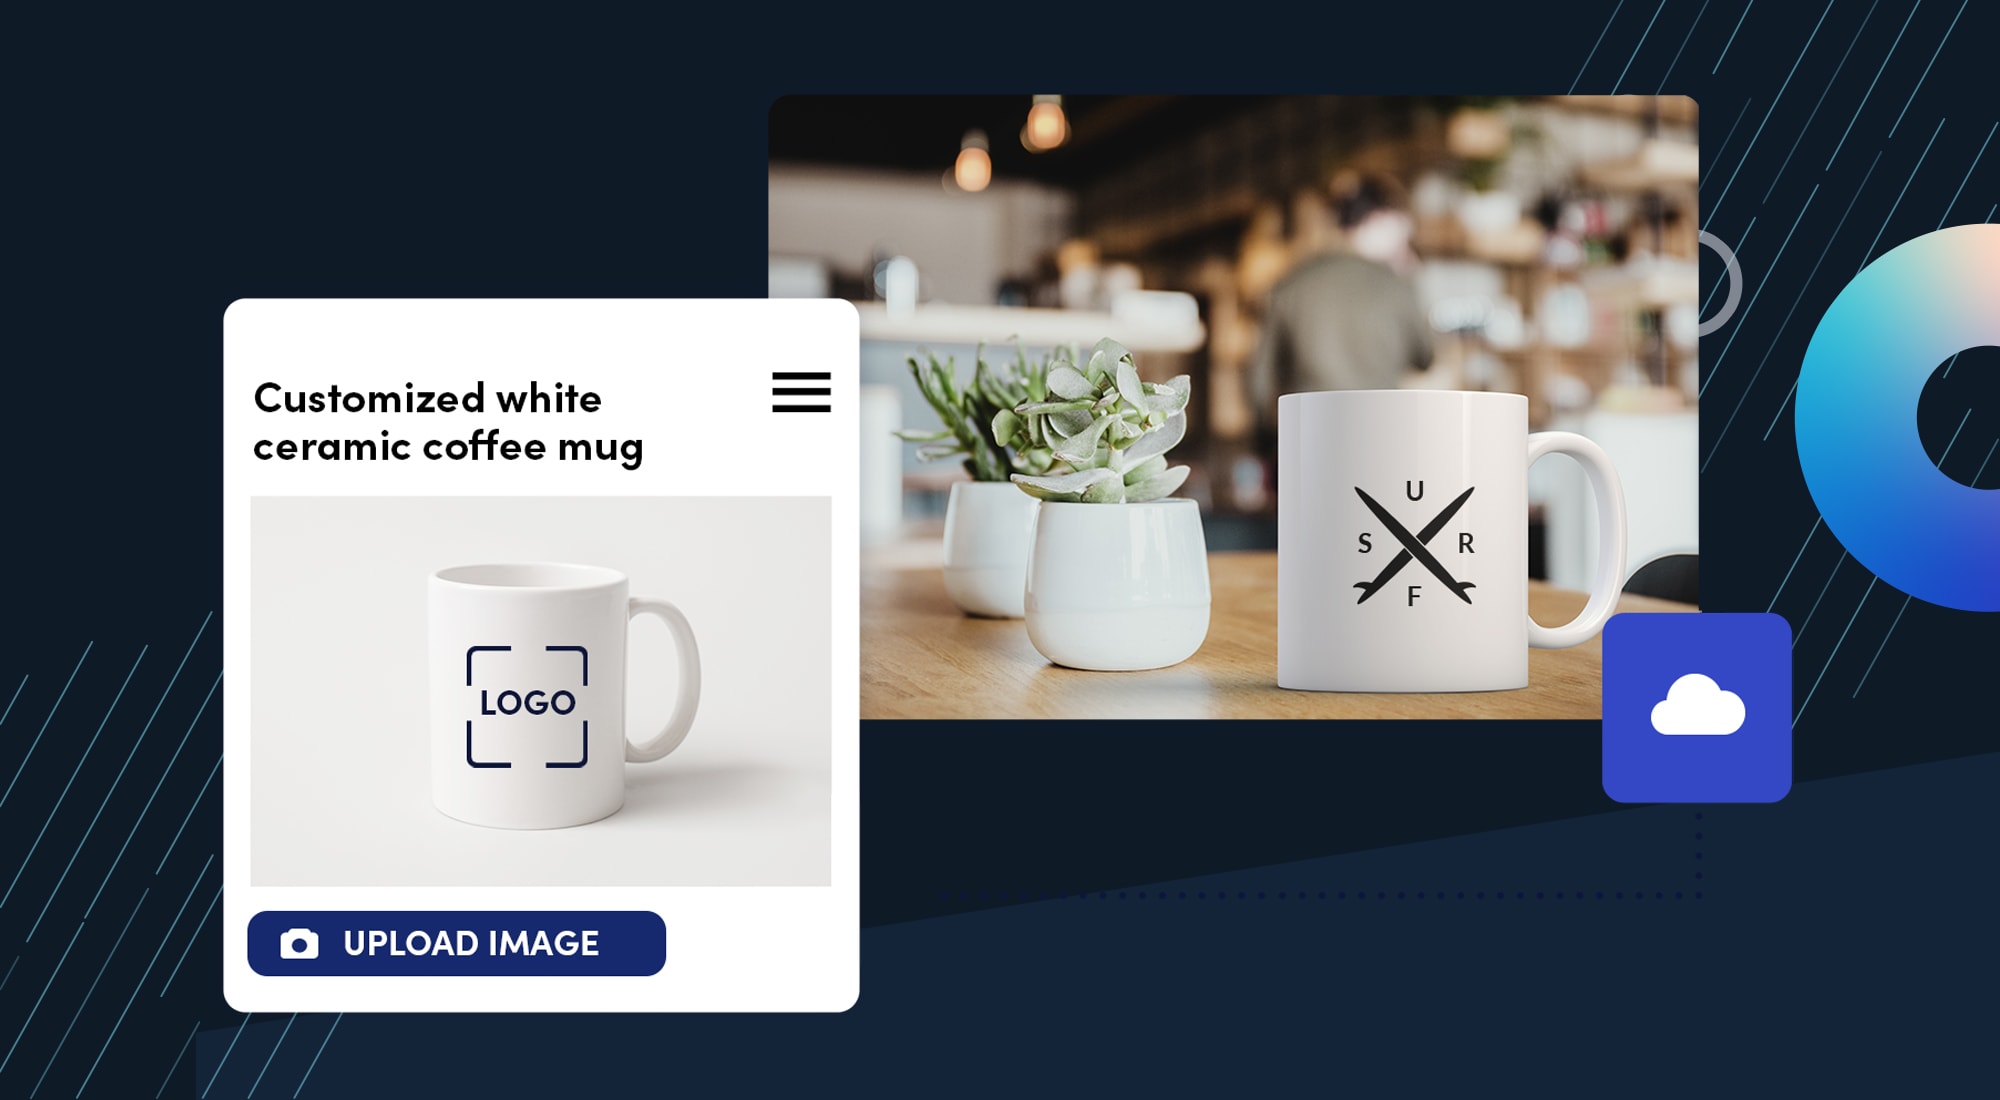 How to build an Online Customizable-Anything Product Experience